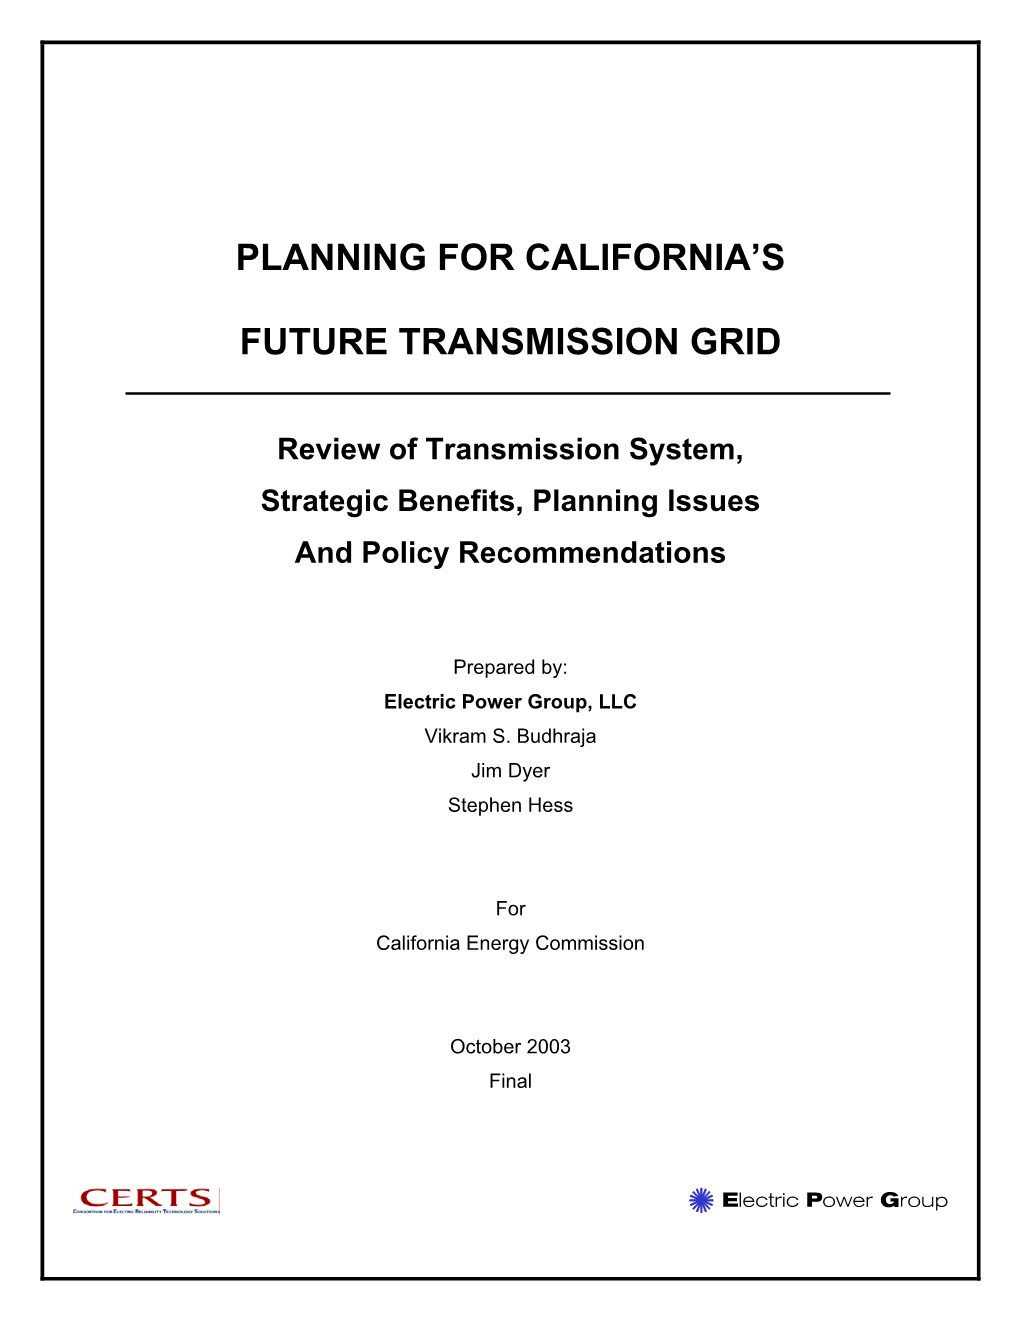 Planning for California's Future Transmission Grid